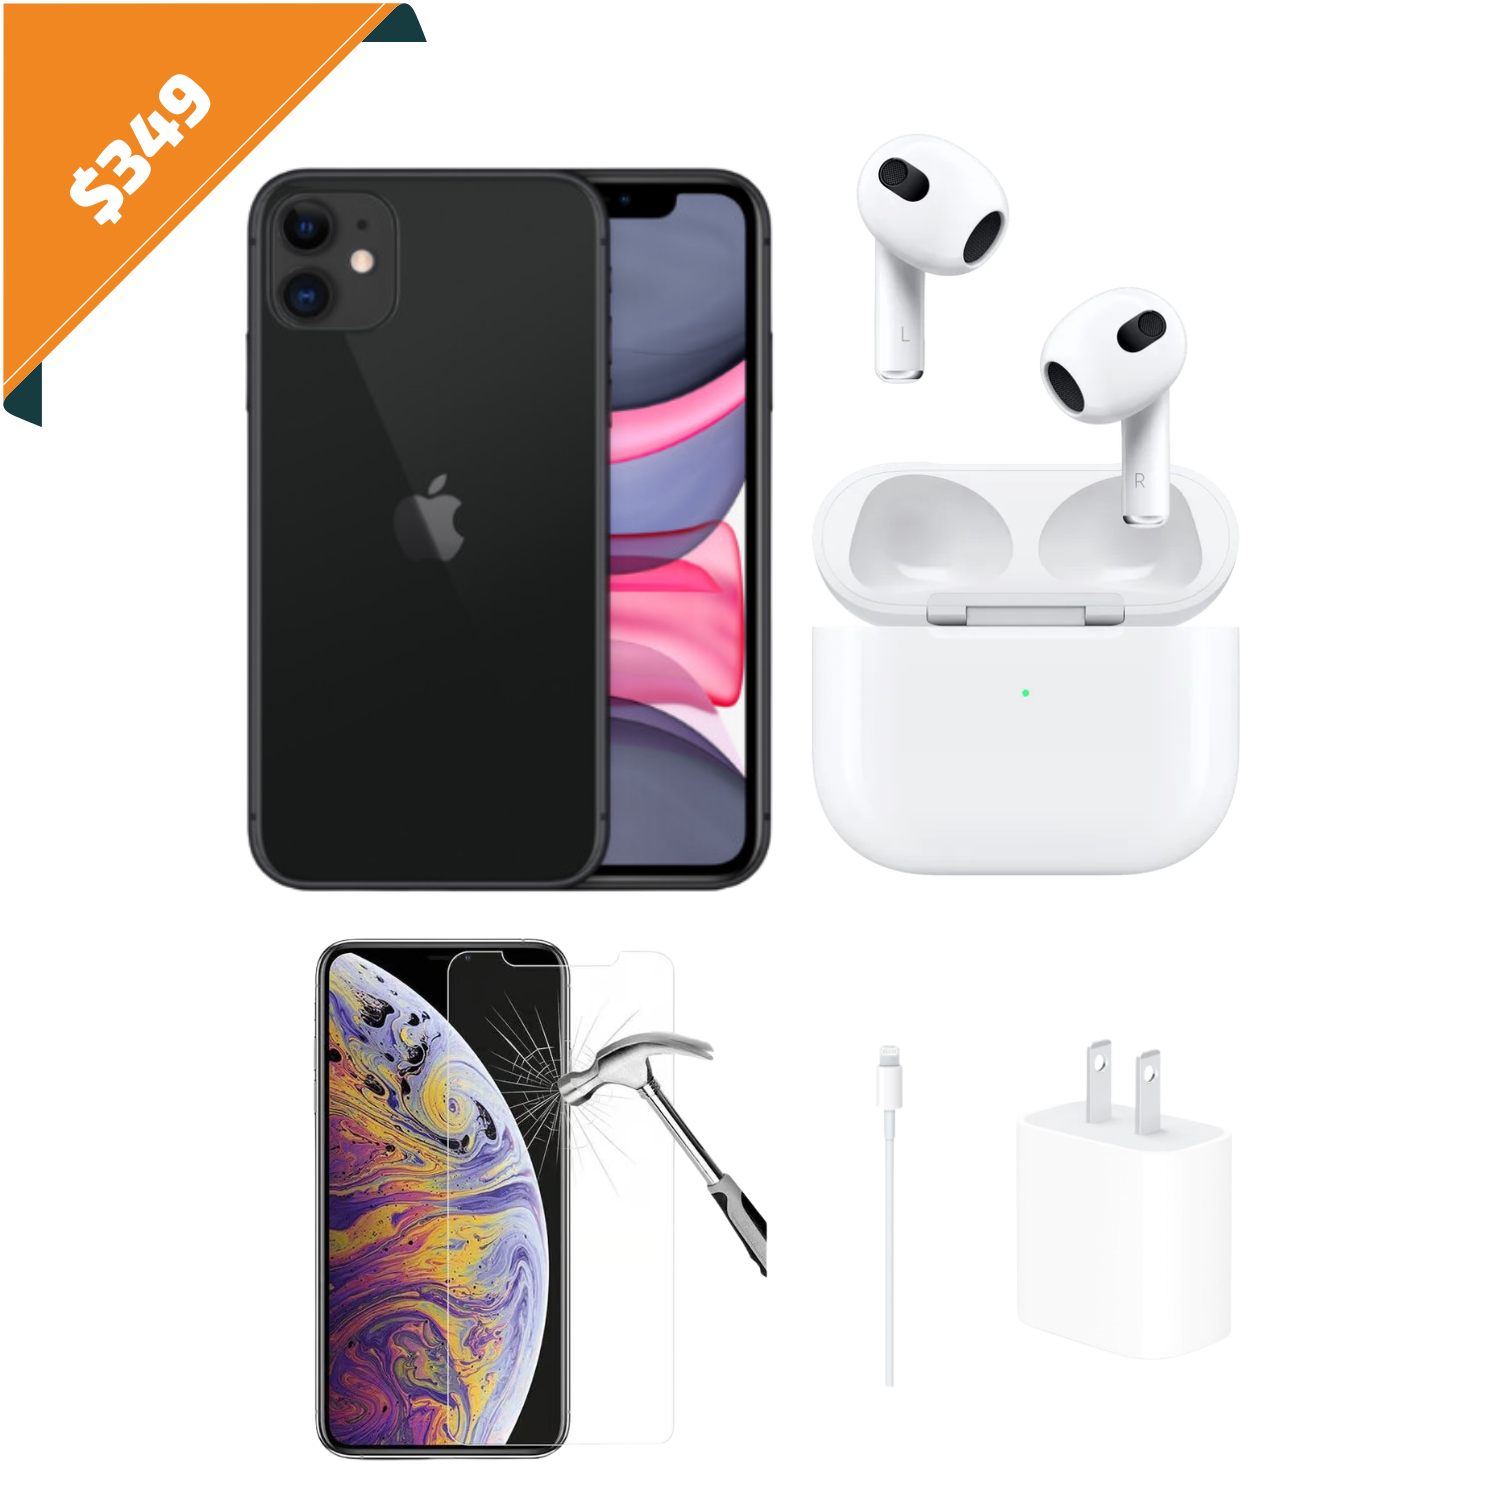 iPhone 11 + Airpods Pack